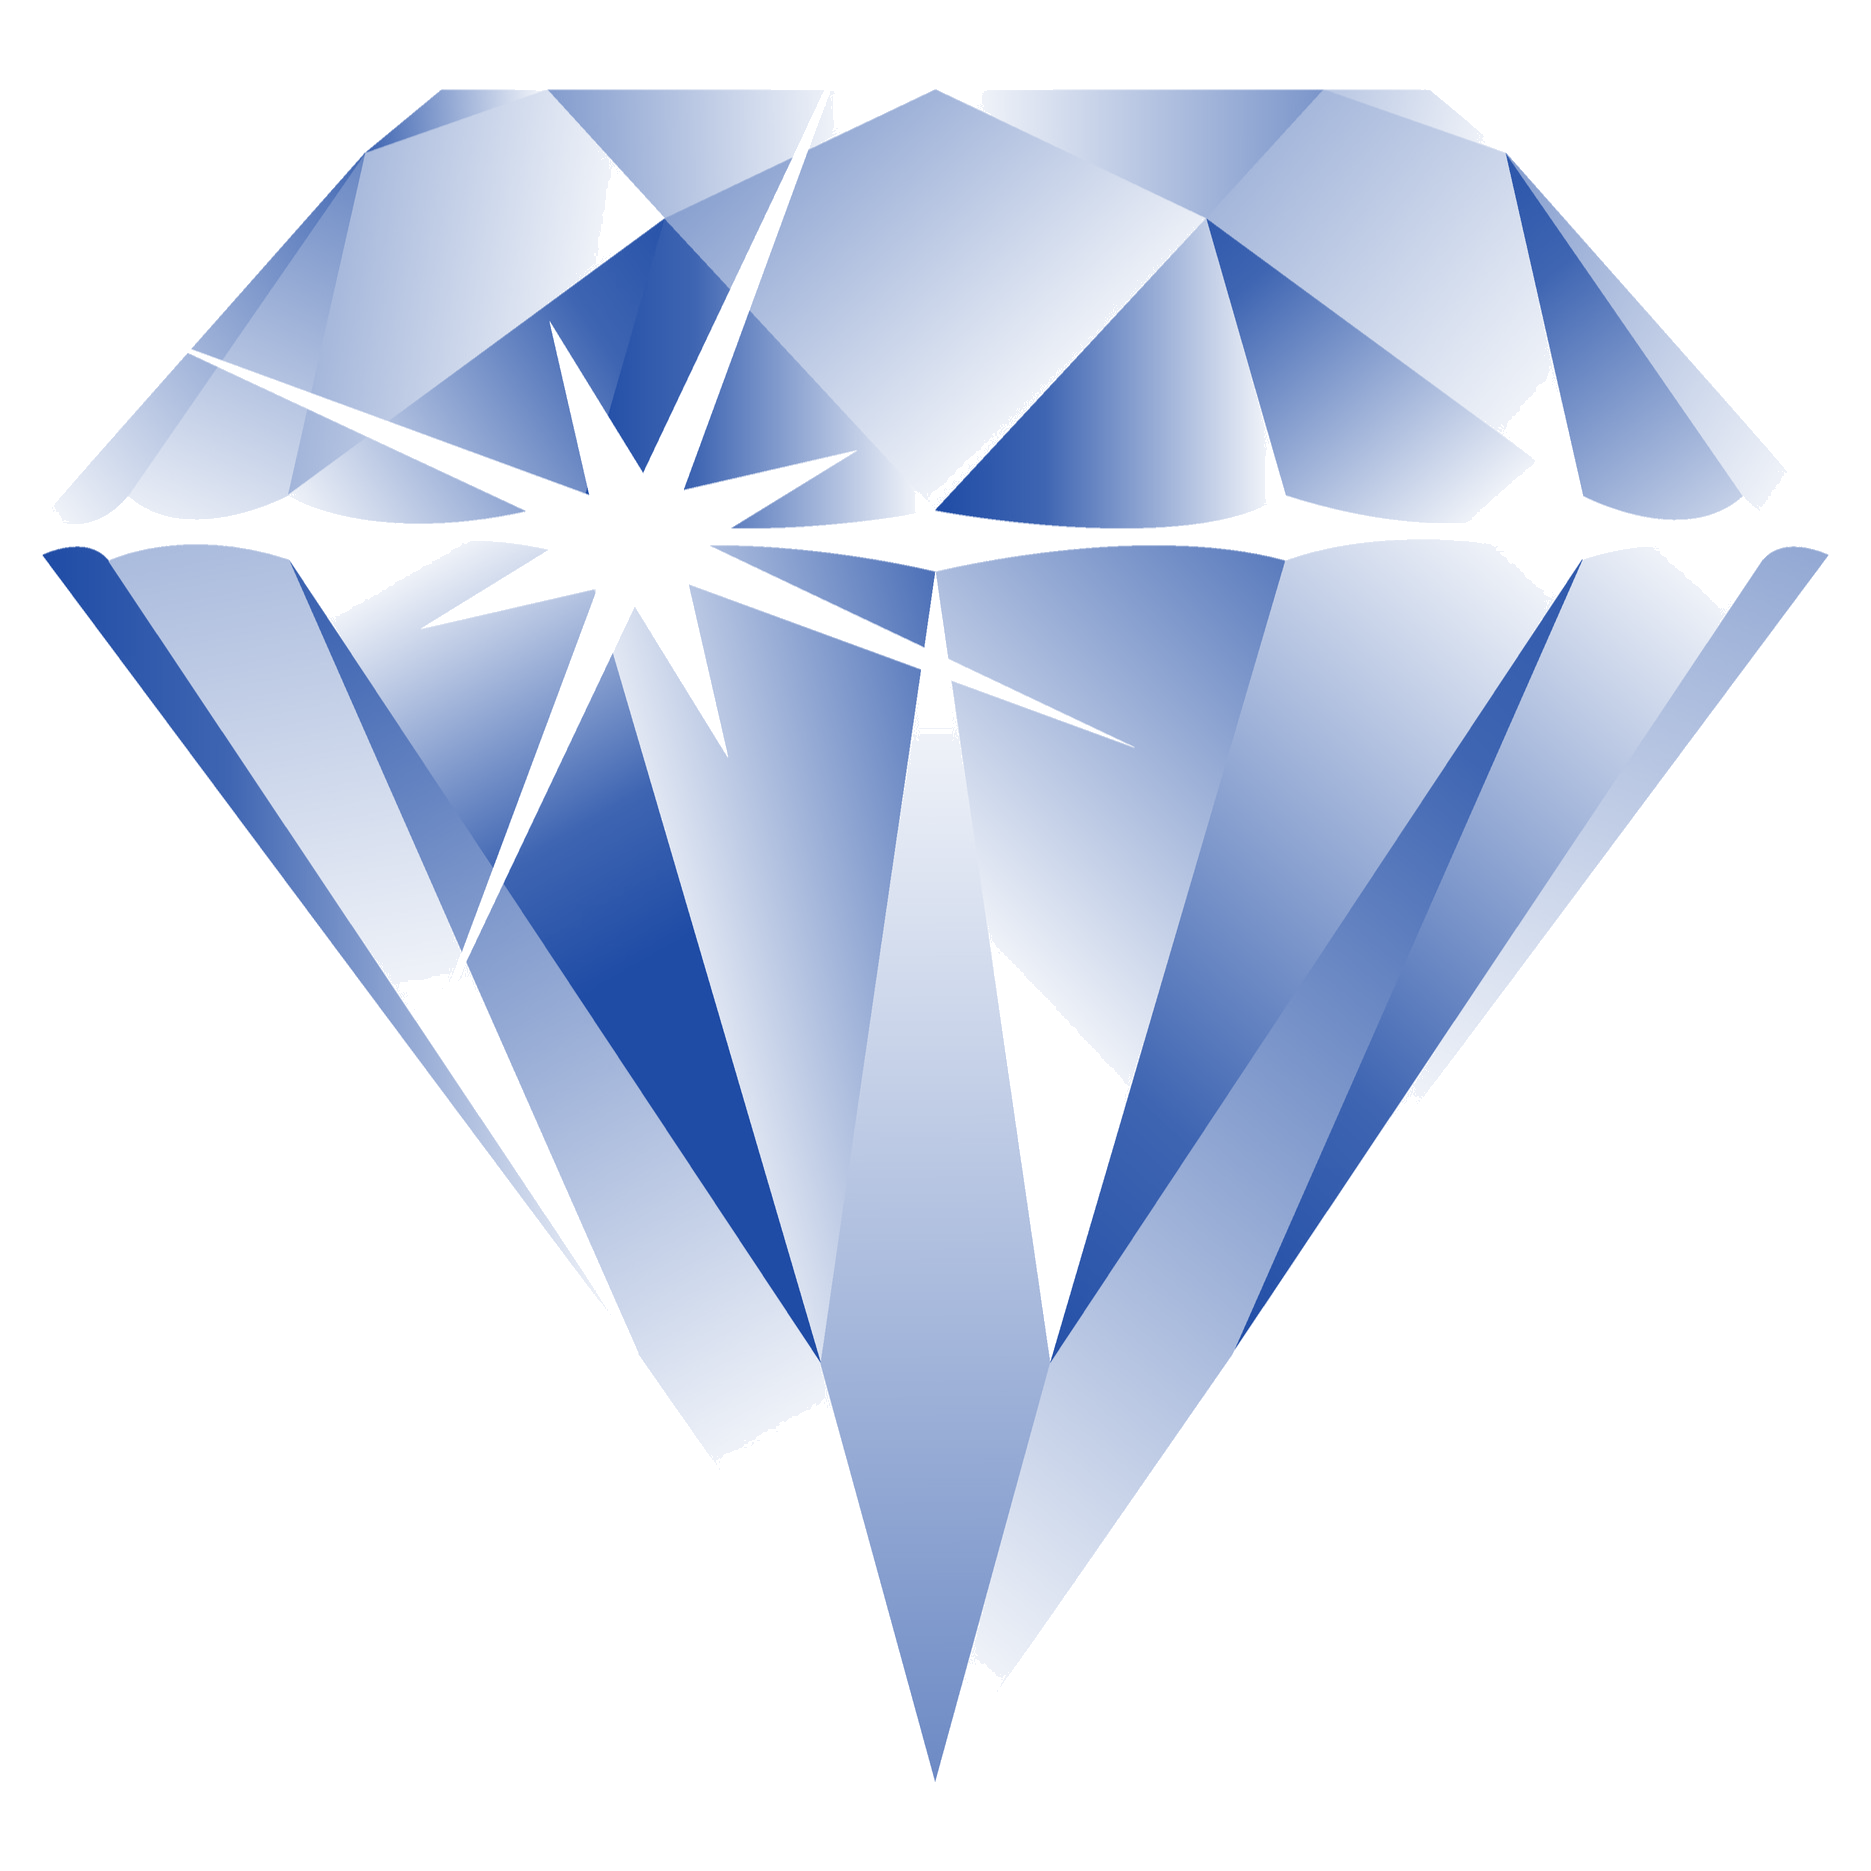 Polishing Cleanliness Diamond Wallpaper Picture Free HQ Image Clipart